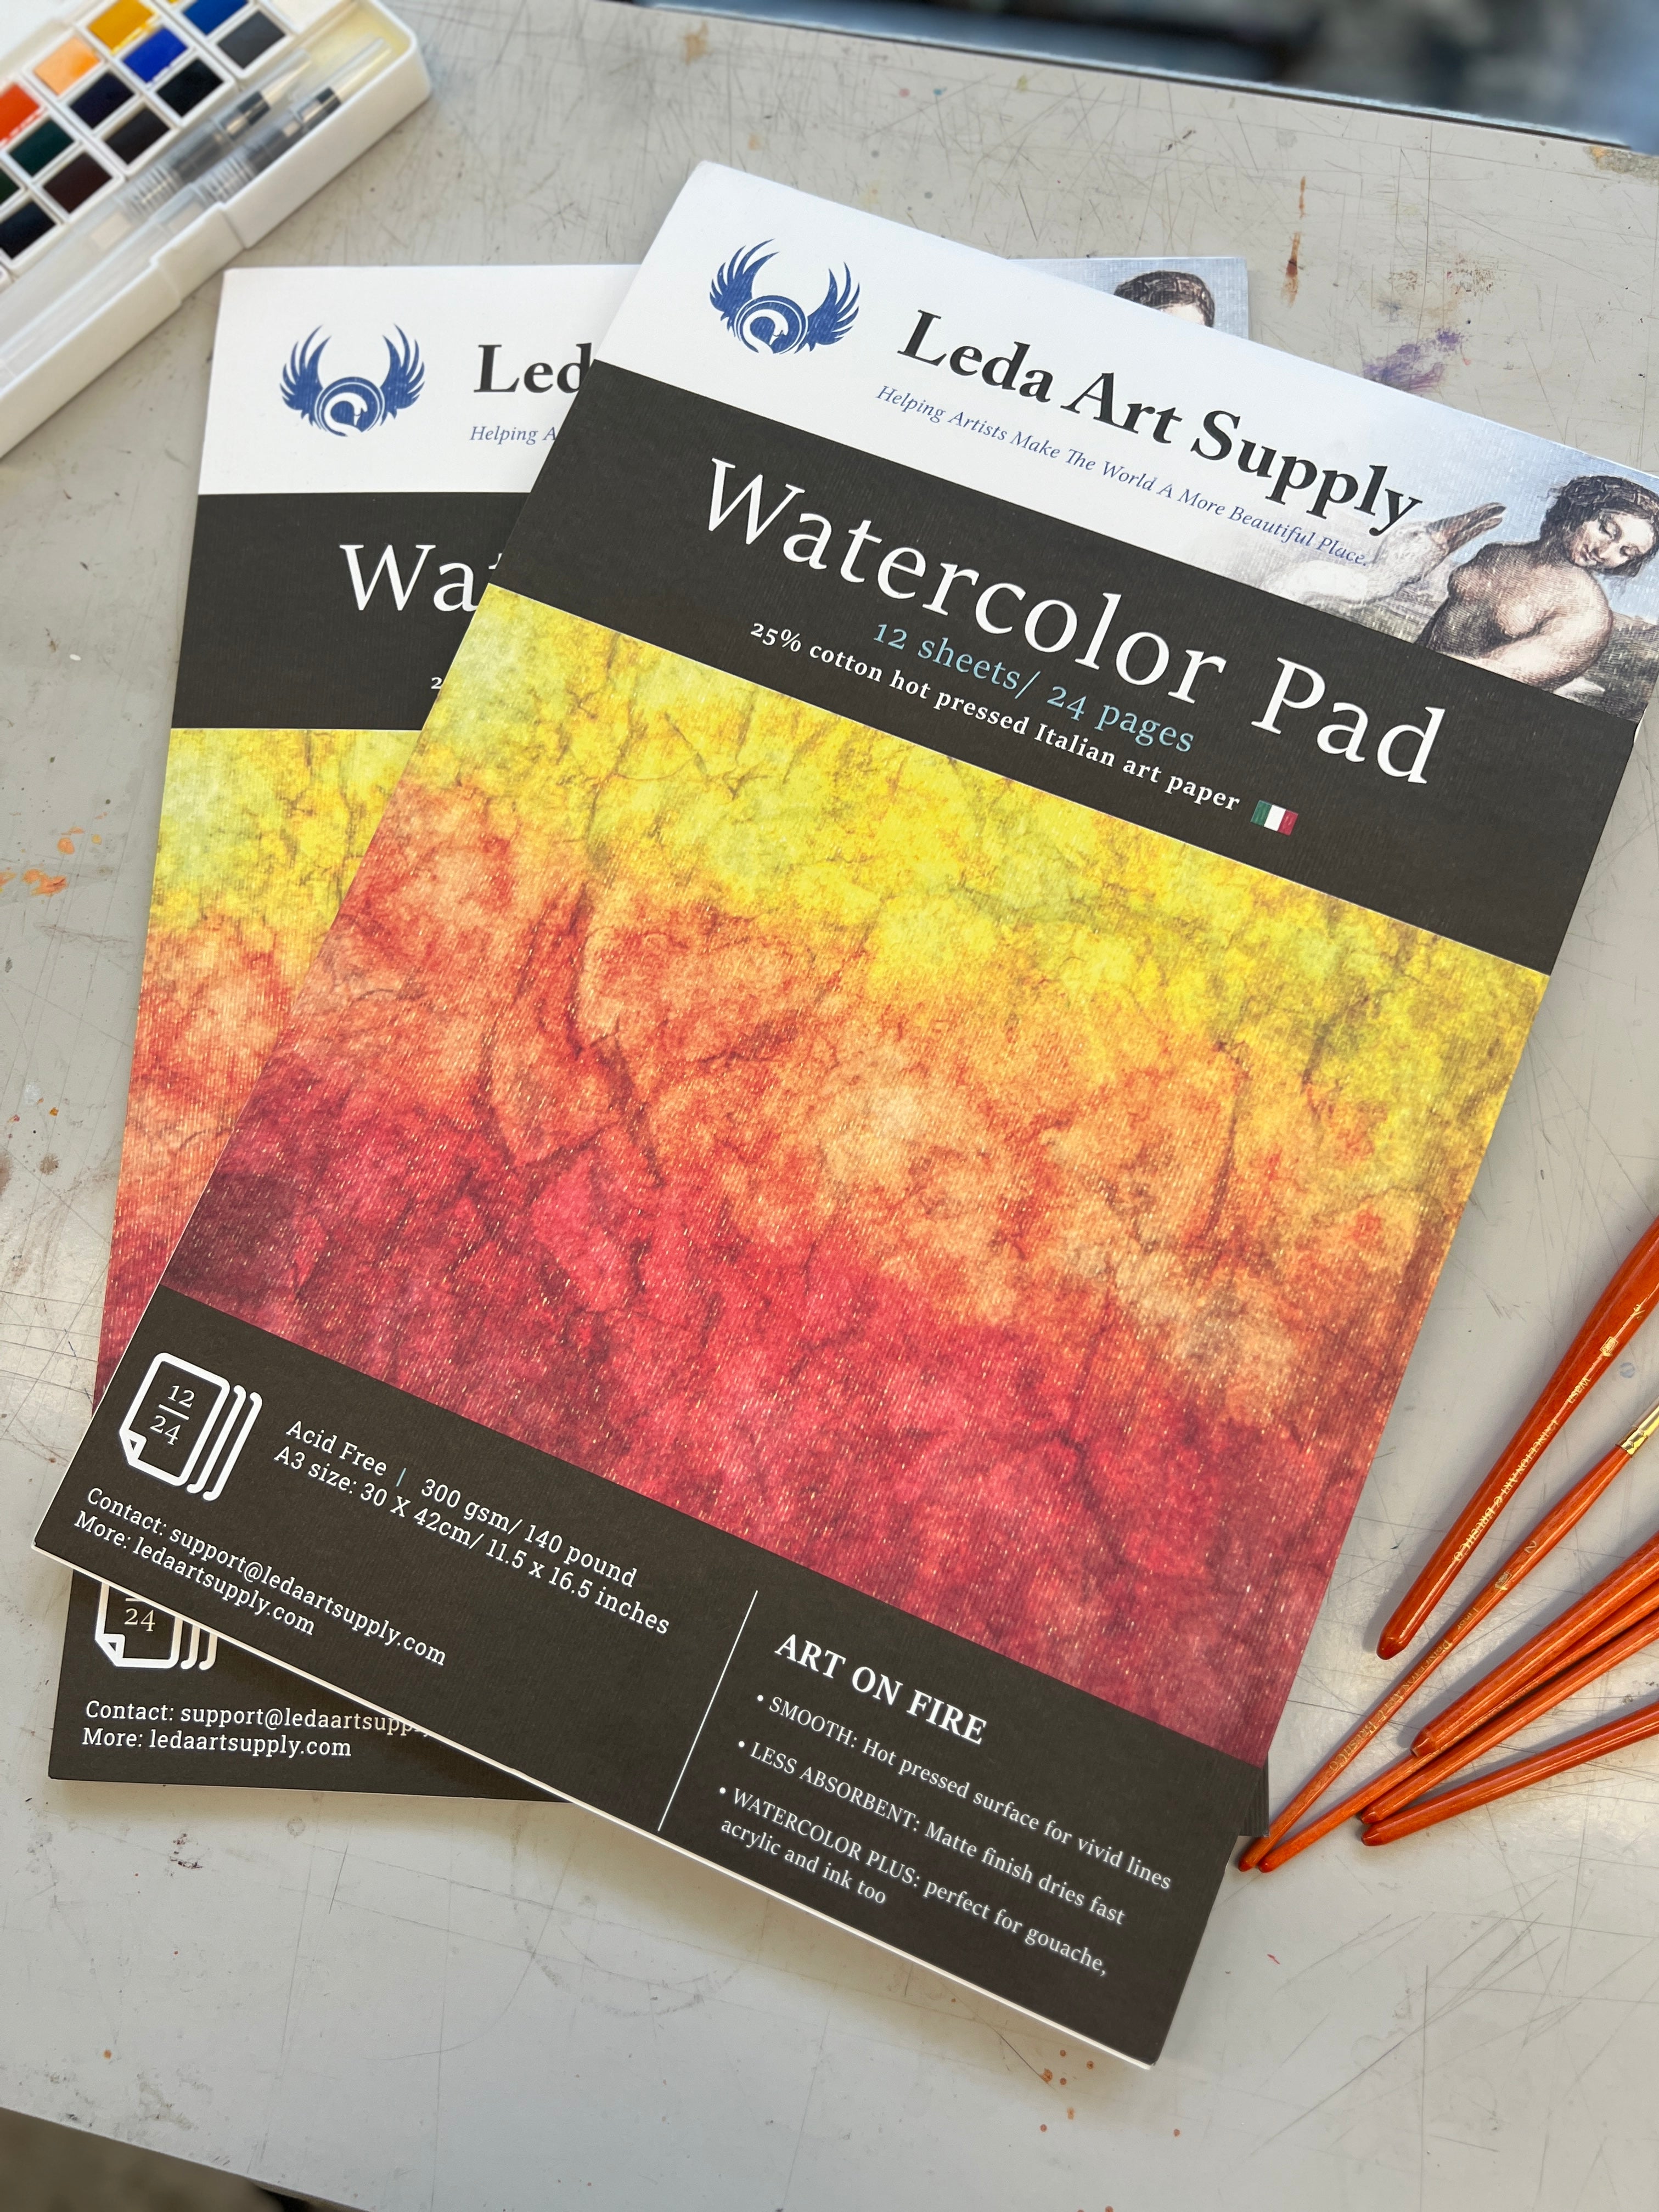 Leda Art Supply A3 Hot Pressed Watercolor Pad Jumbo 2 Pack (24 Sheets) Art Paper Pads -- 25% Cotton with Smooth Surface for Professional renderings (A3 Size 11.5 x 16.5 inches)